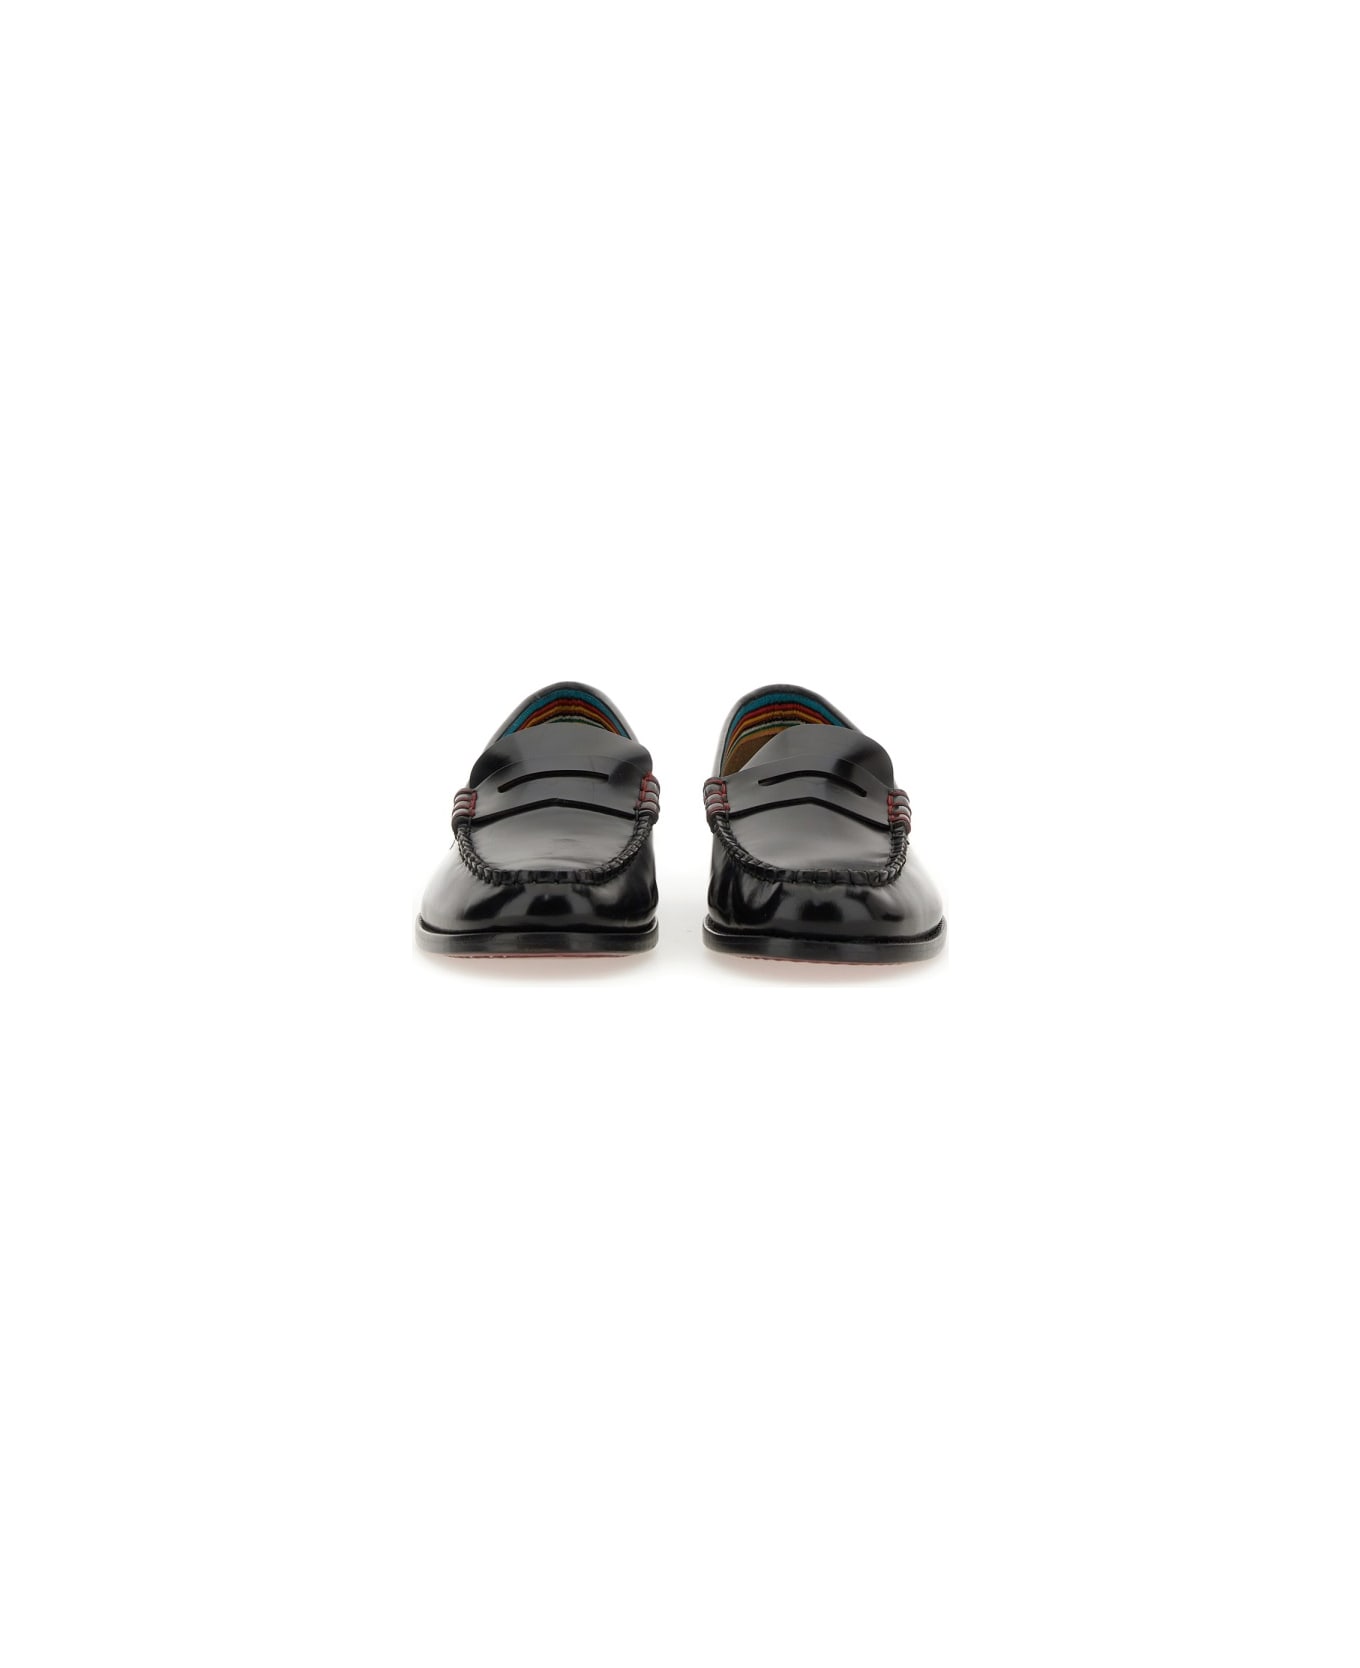 Paul Smith Leather Loafer - BLACK フラットシューズ